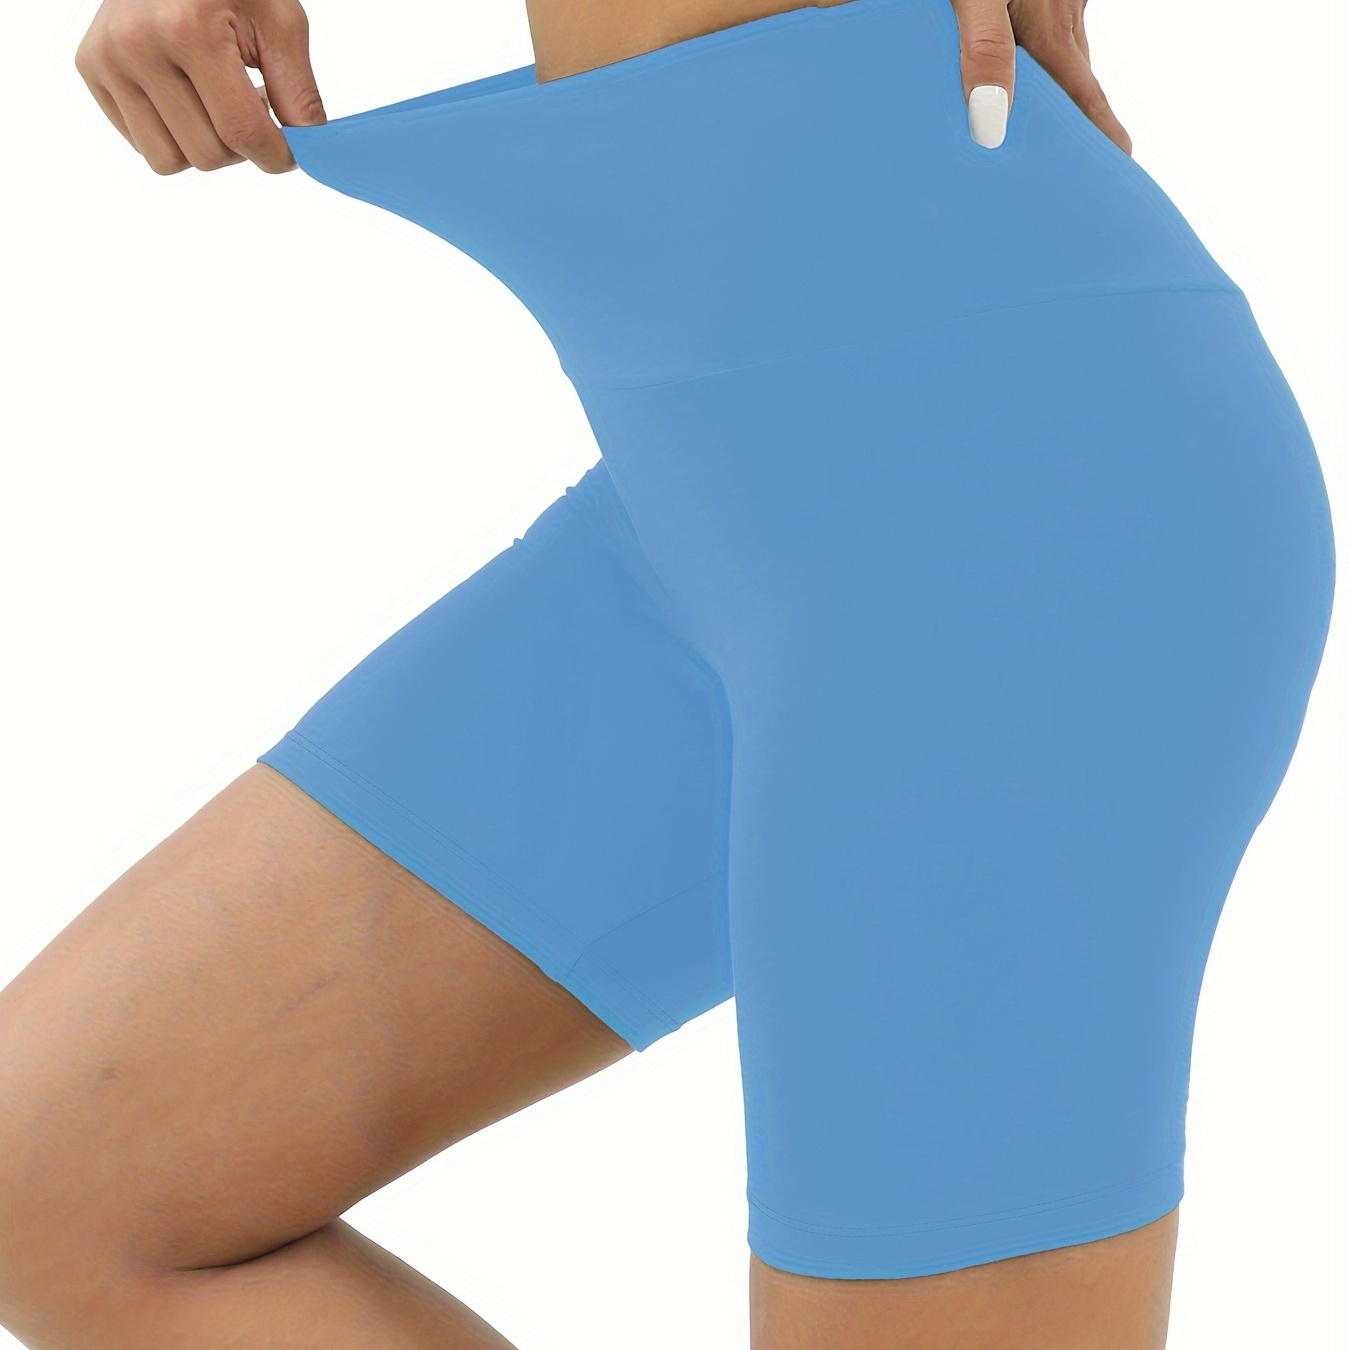 

High Waisted Biker Shorts For Women, Super Soft No See Through Workout Yoga Running Athletic Shorts, Women's Activewear